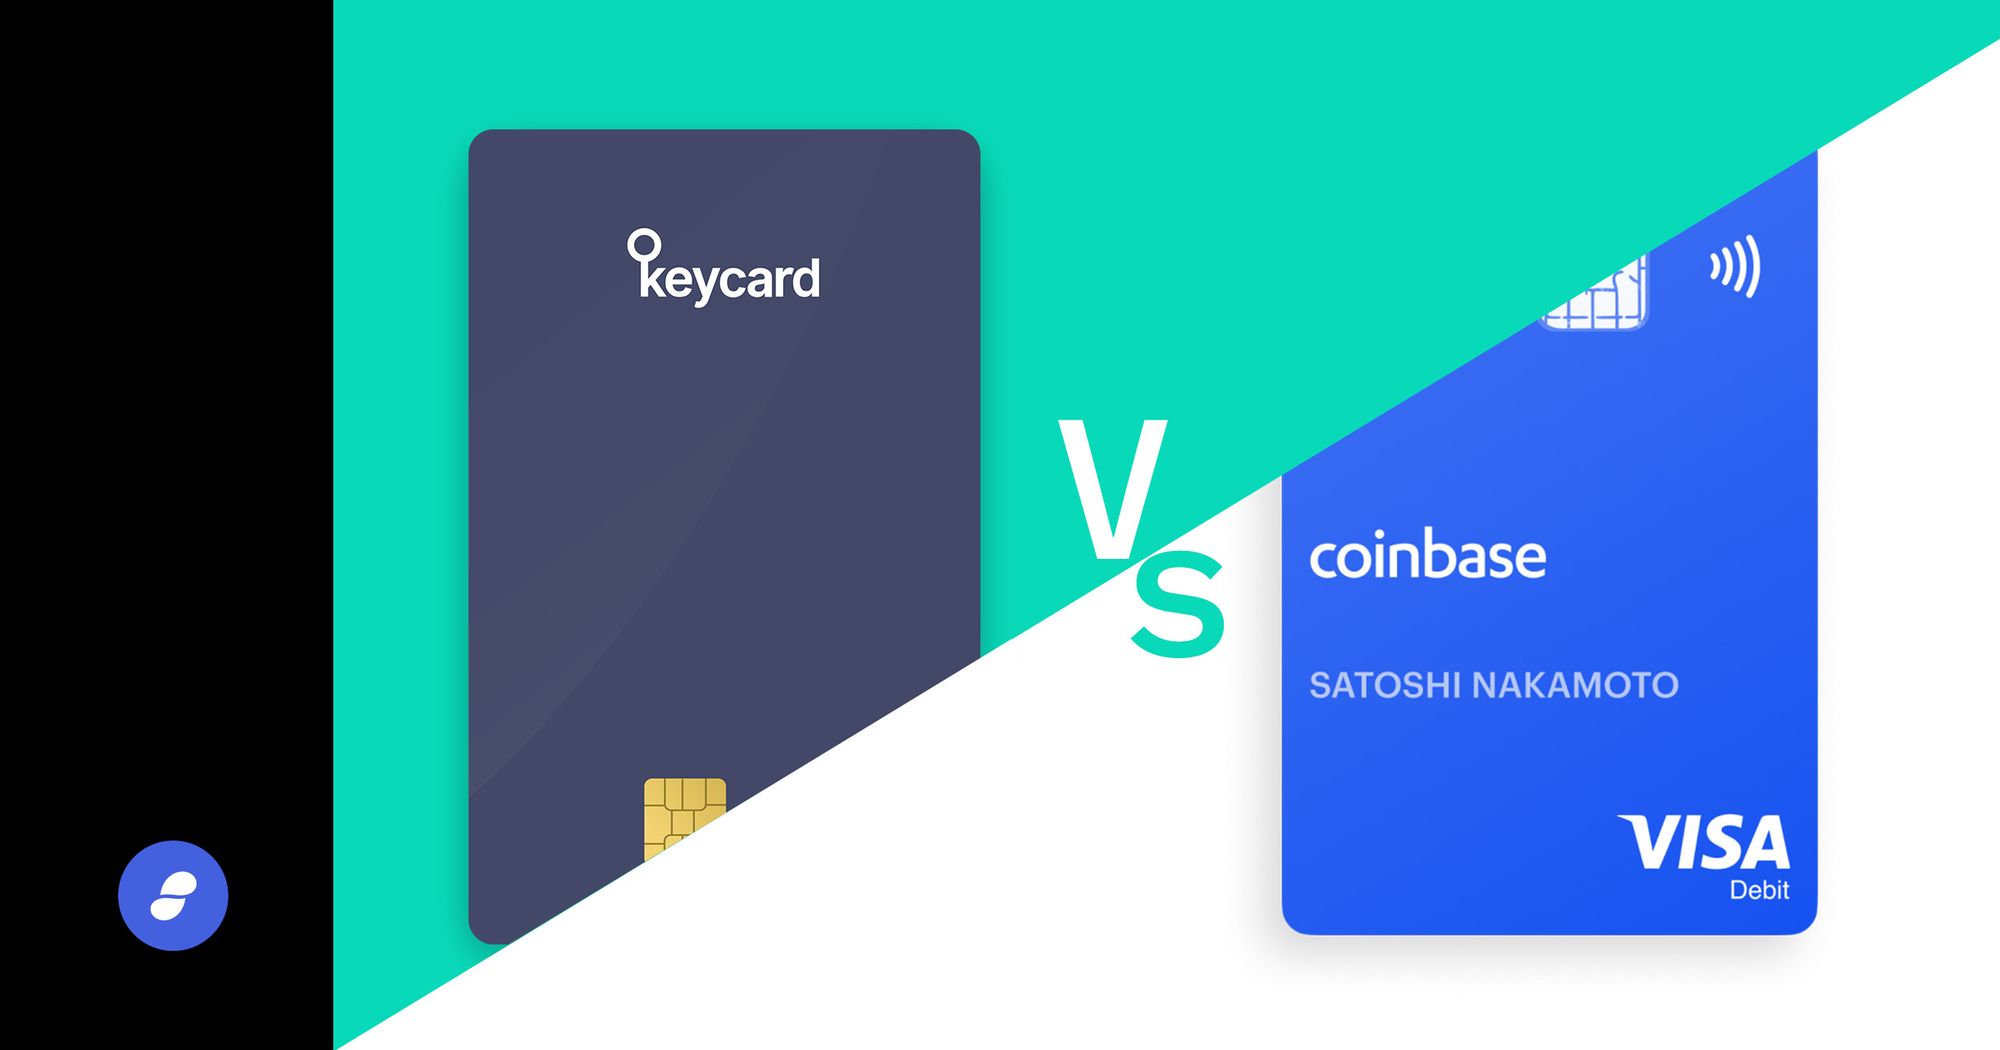 Coinbase Card vs Keycard: What's the difference?